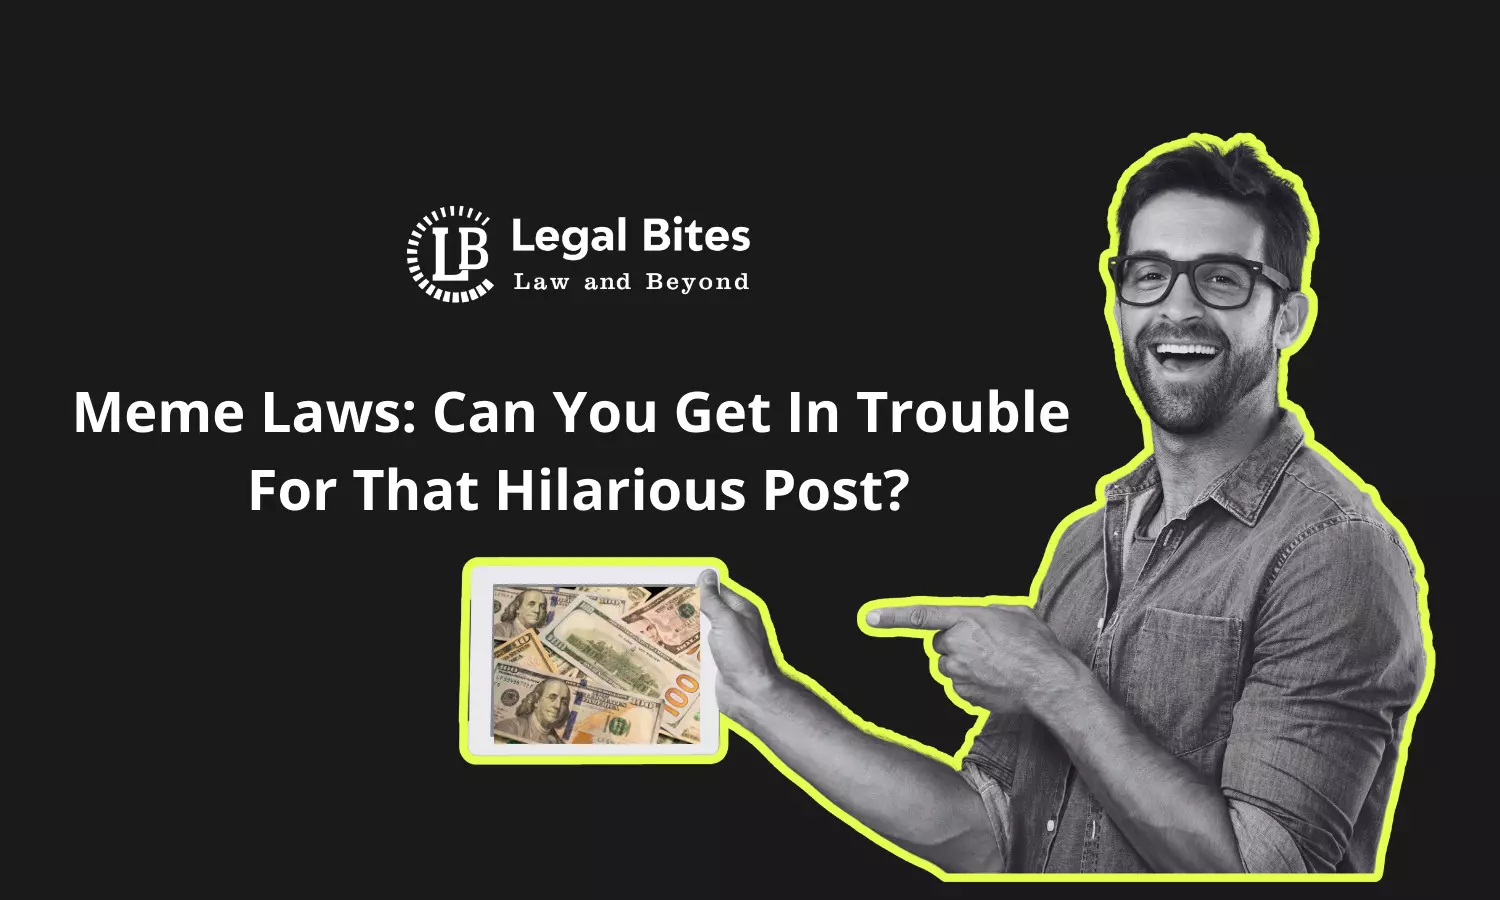 Meme Laws: Can You Get In Trouble For That Hilarious Post?